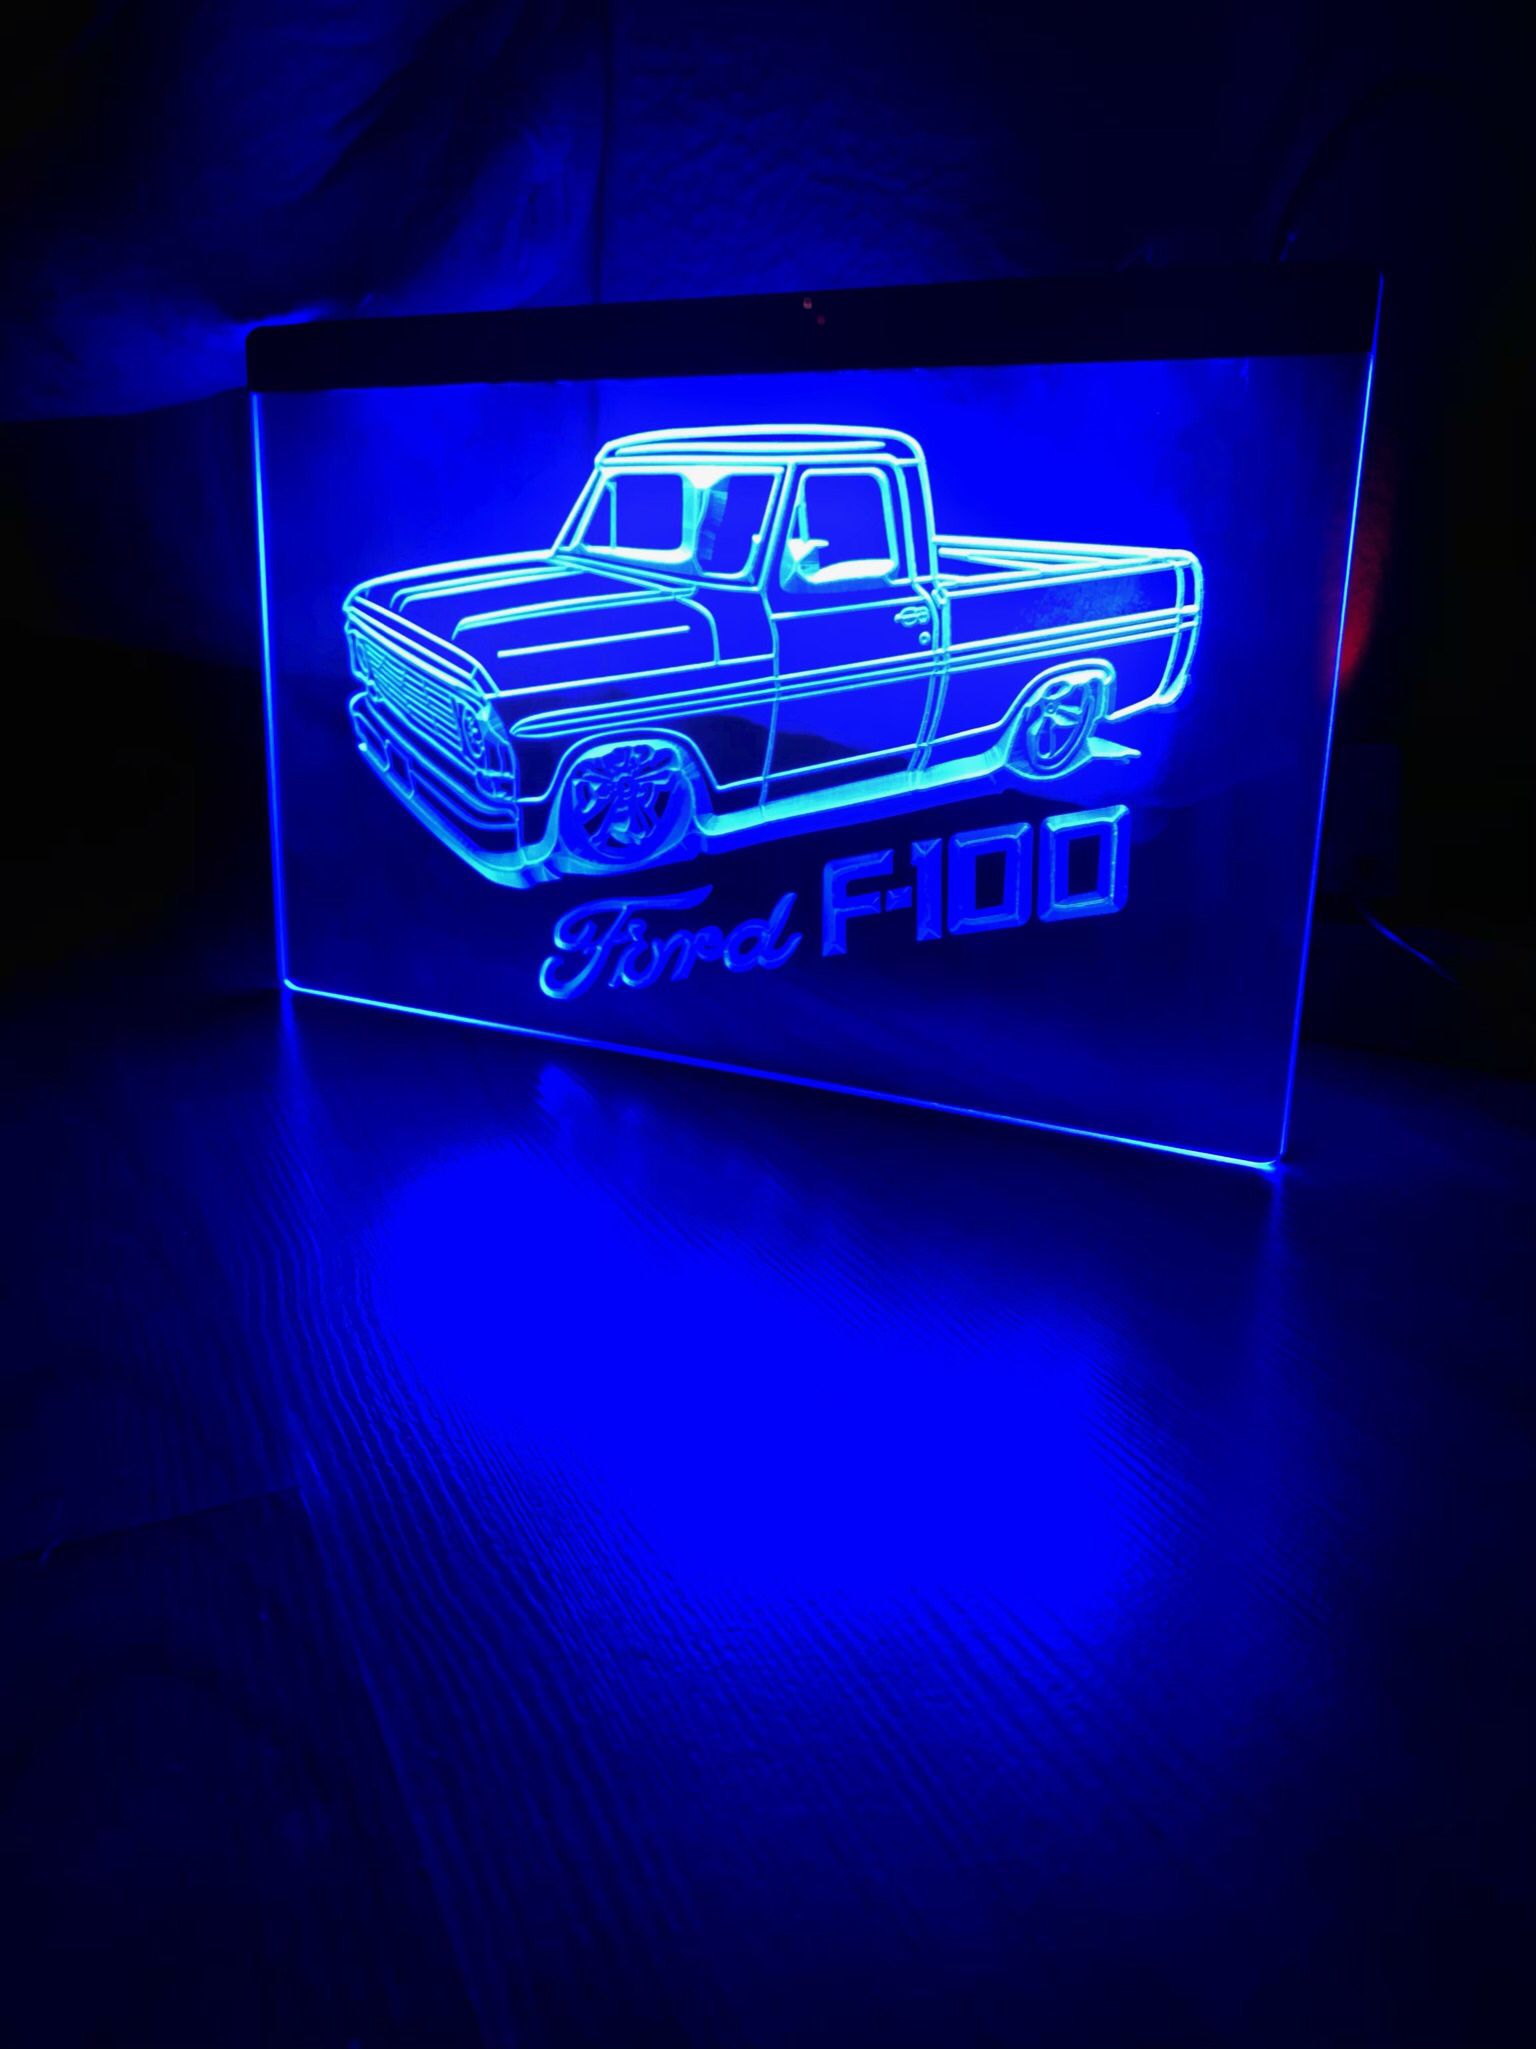 FORD F100 TRUCK LED NEON BLUE LIGHT SIGN 8x12